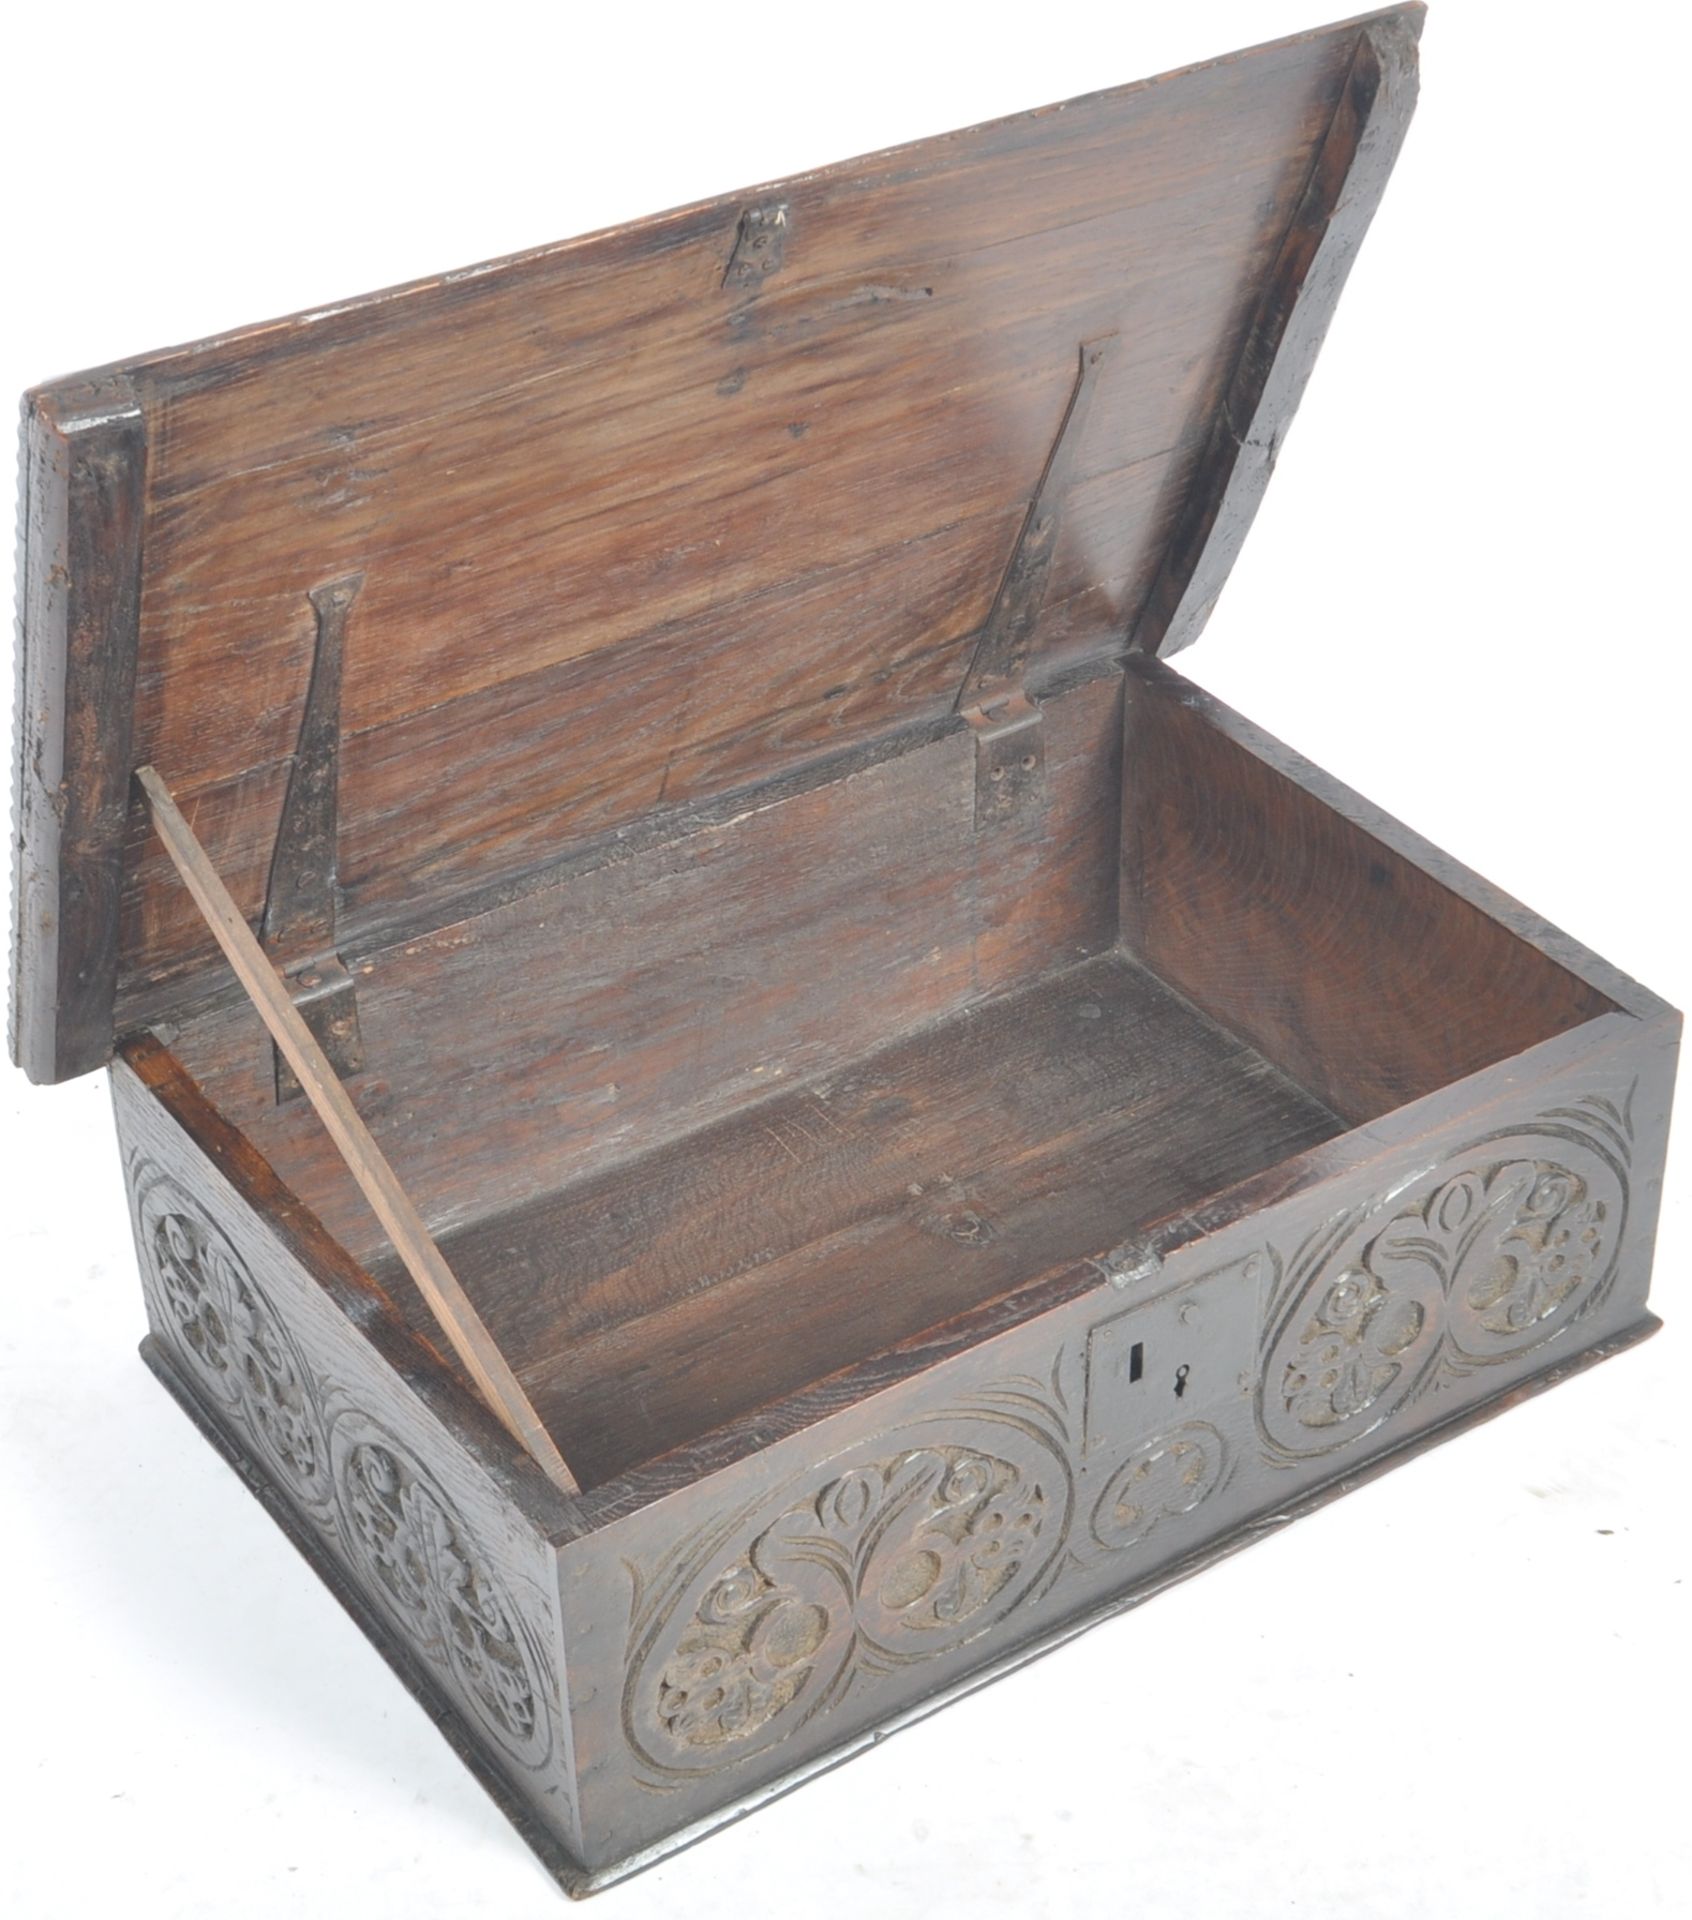 17TH CENTURY CARVED OAK BIBLE BOX - Image 4 of 4